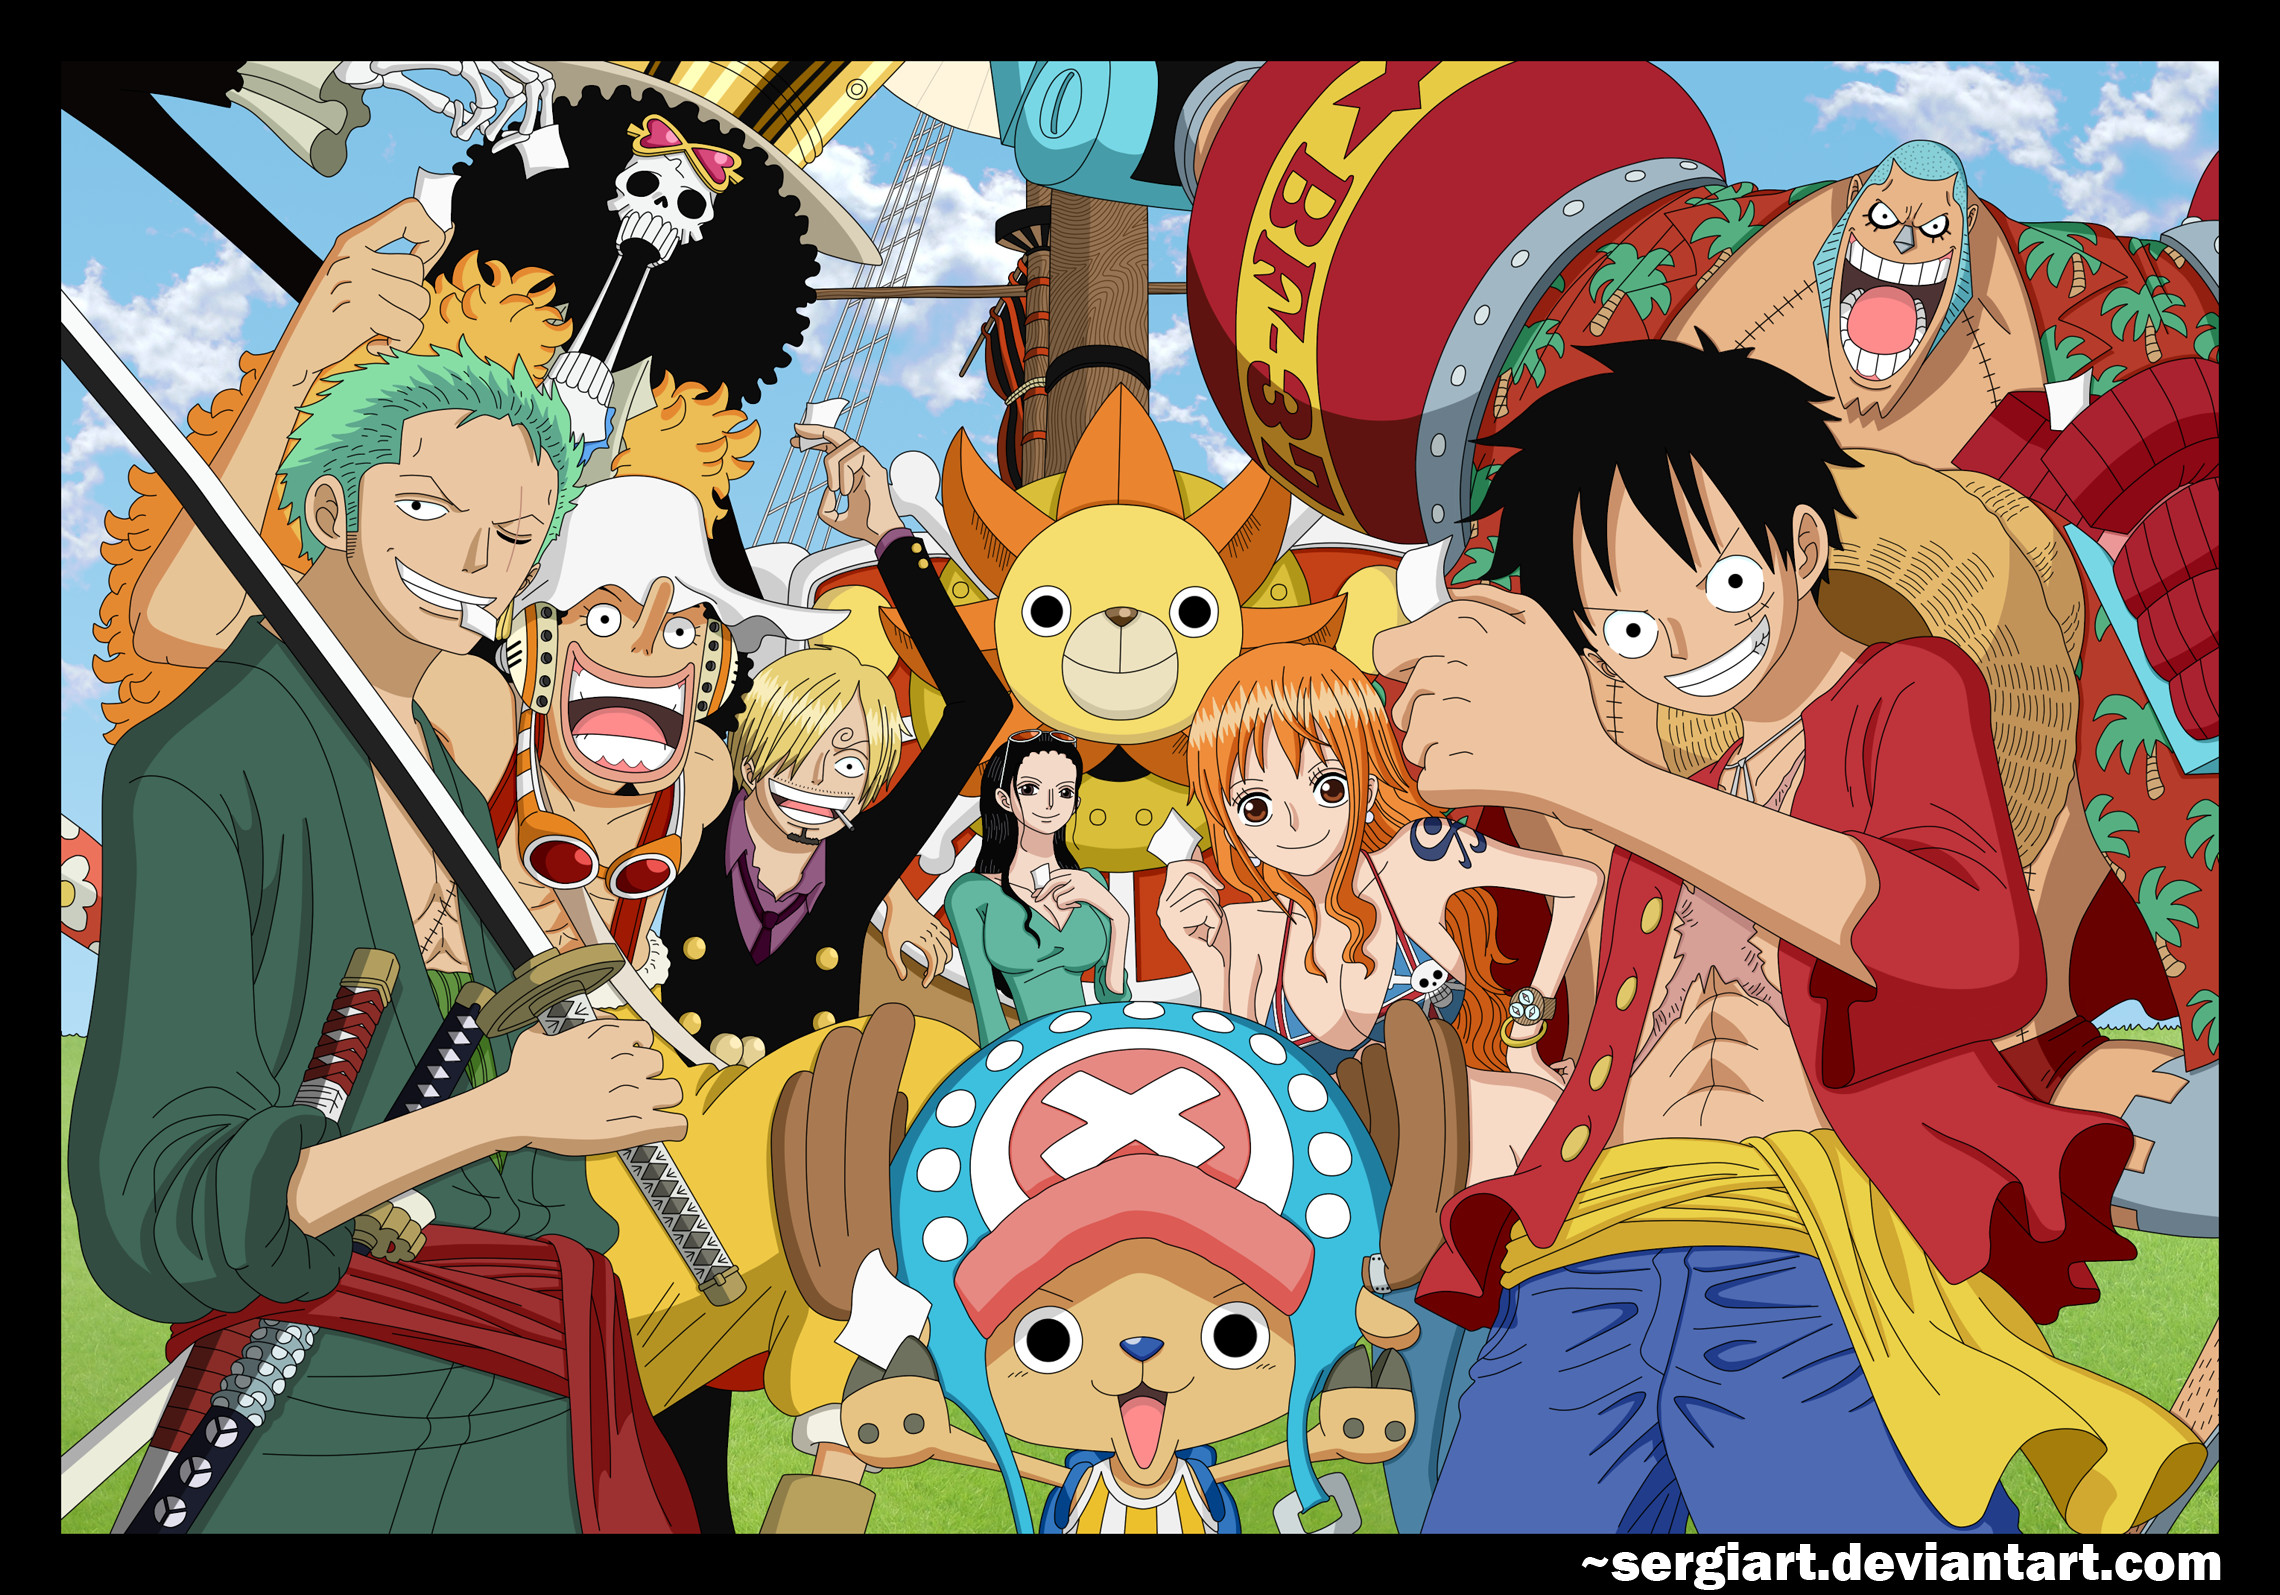 2280x1595 ... One Piece - The great reunion by SergiART